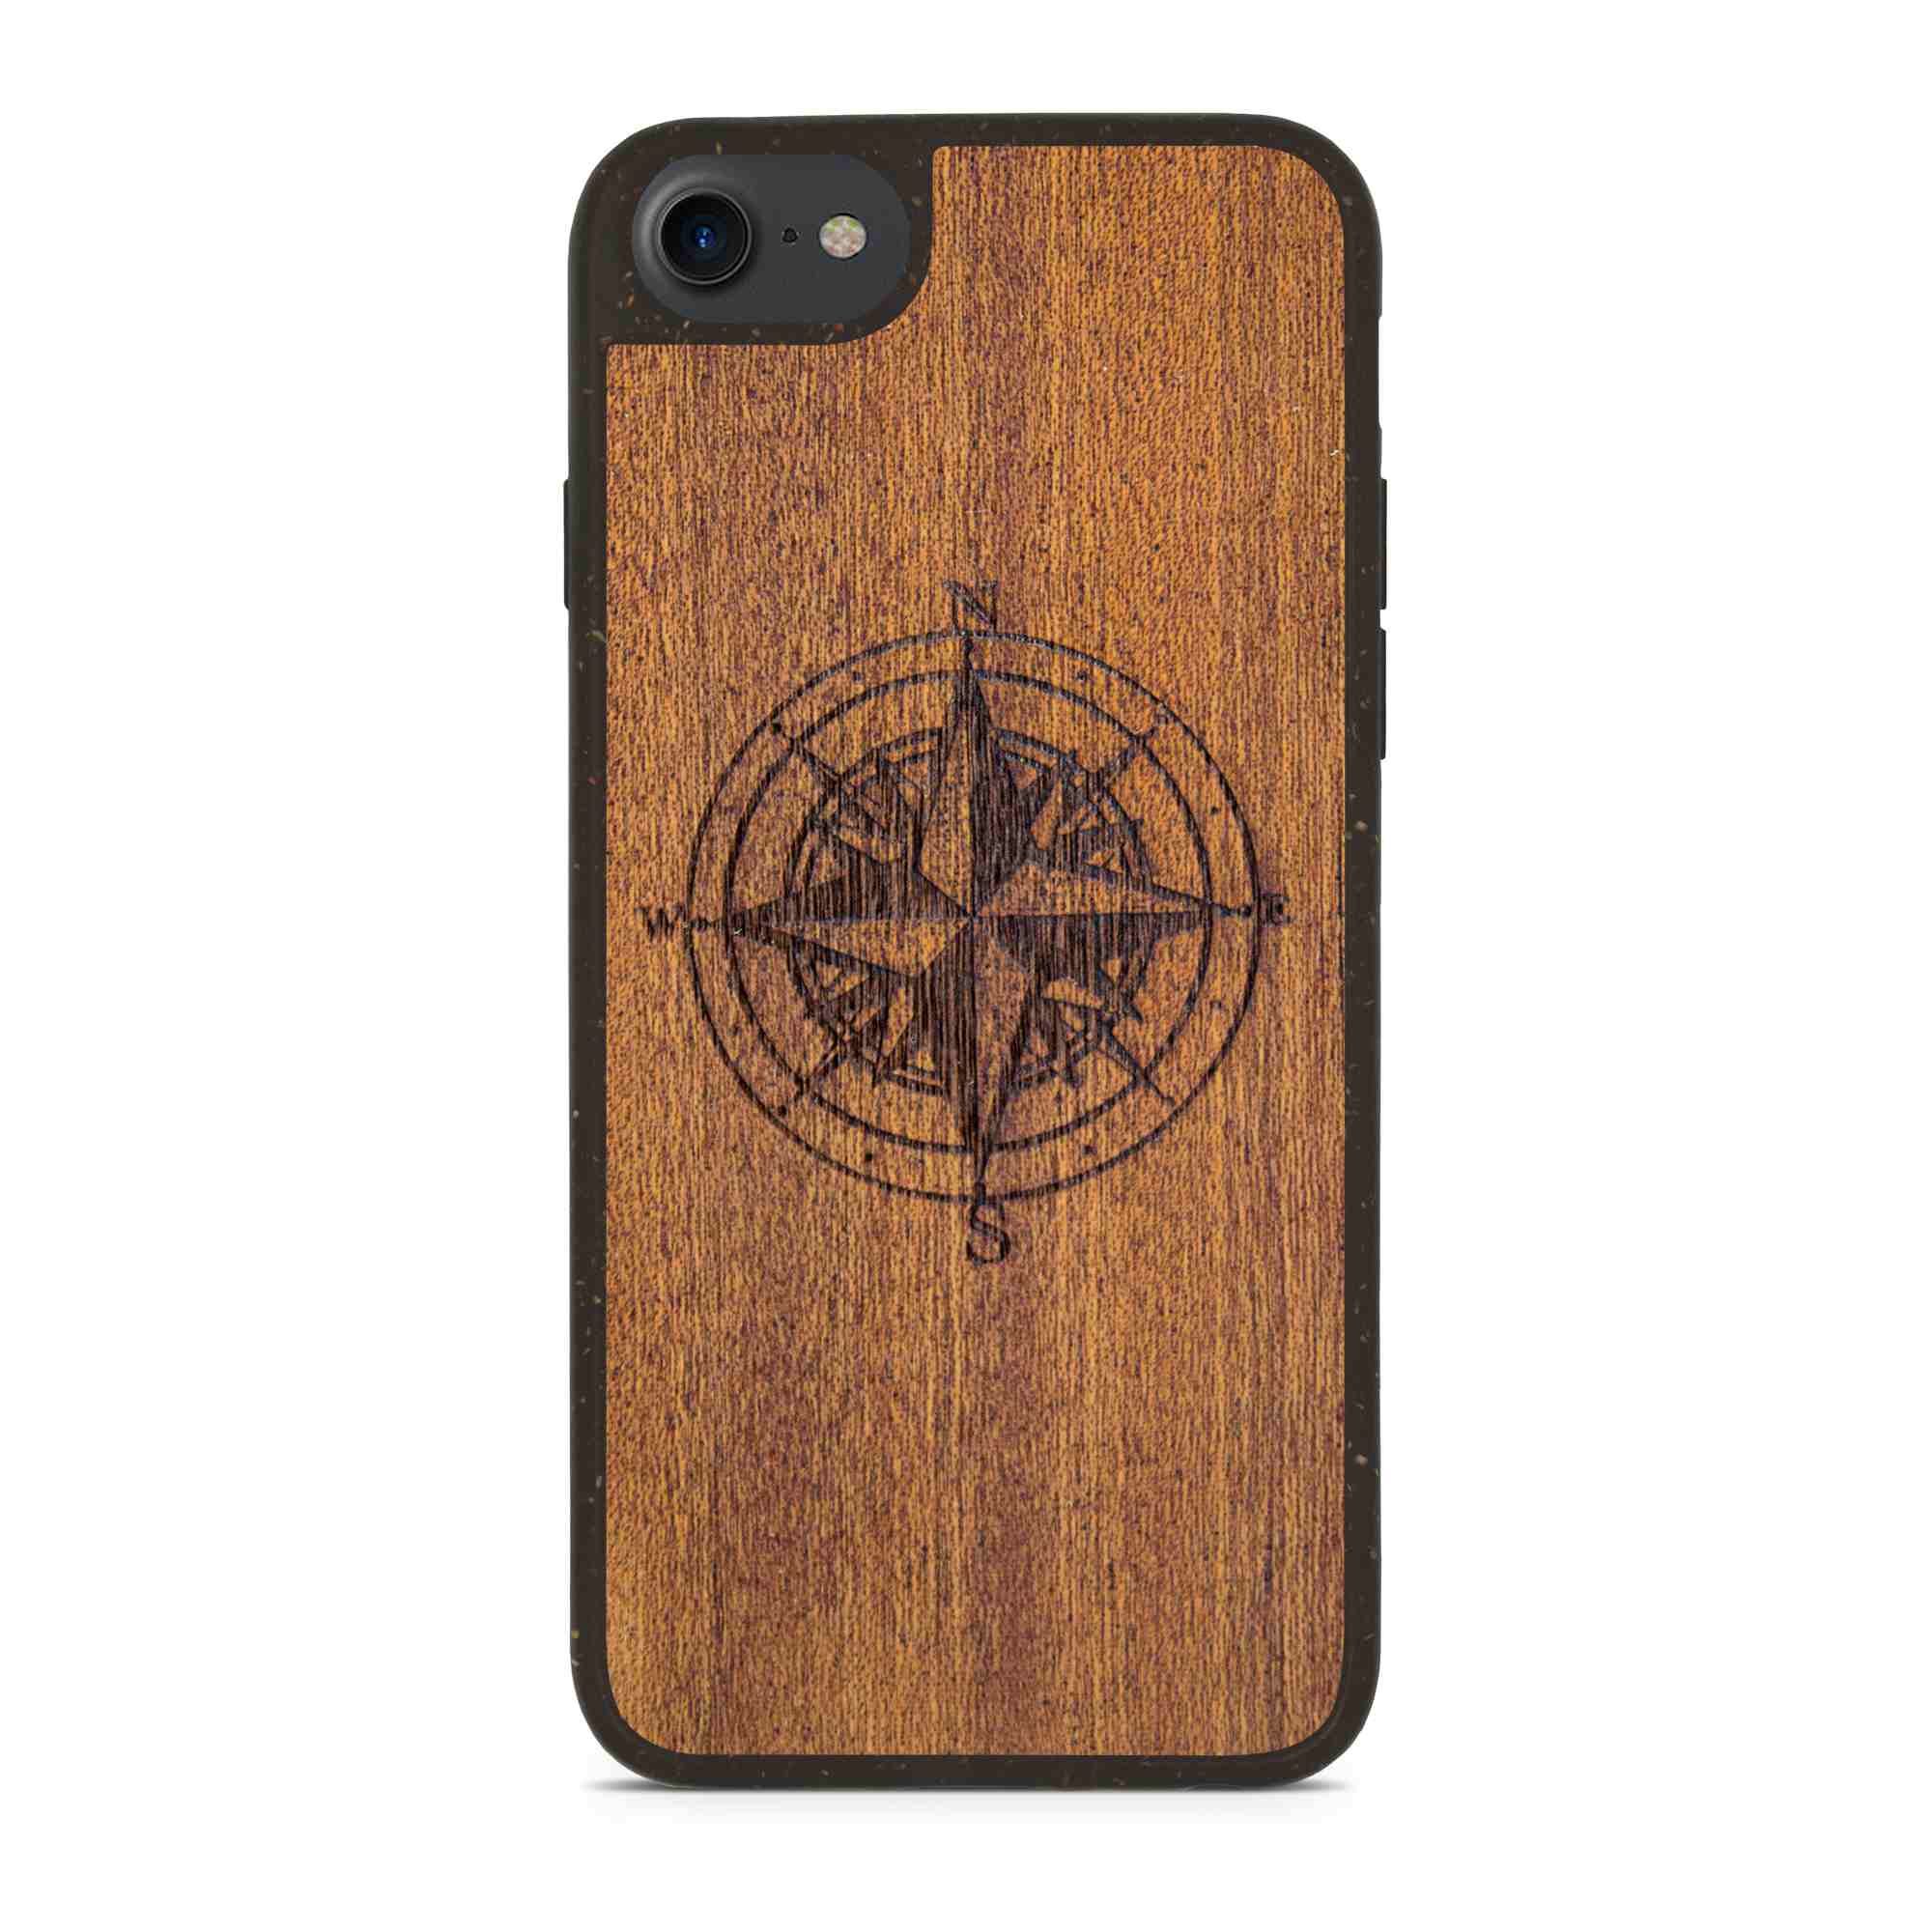 Engraved Compass iPhone 7 Biodegradable Phone Case